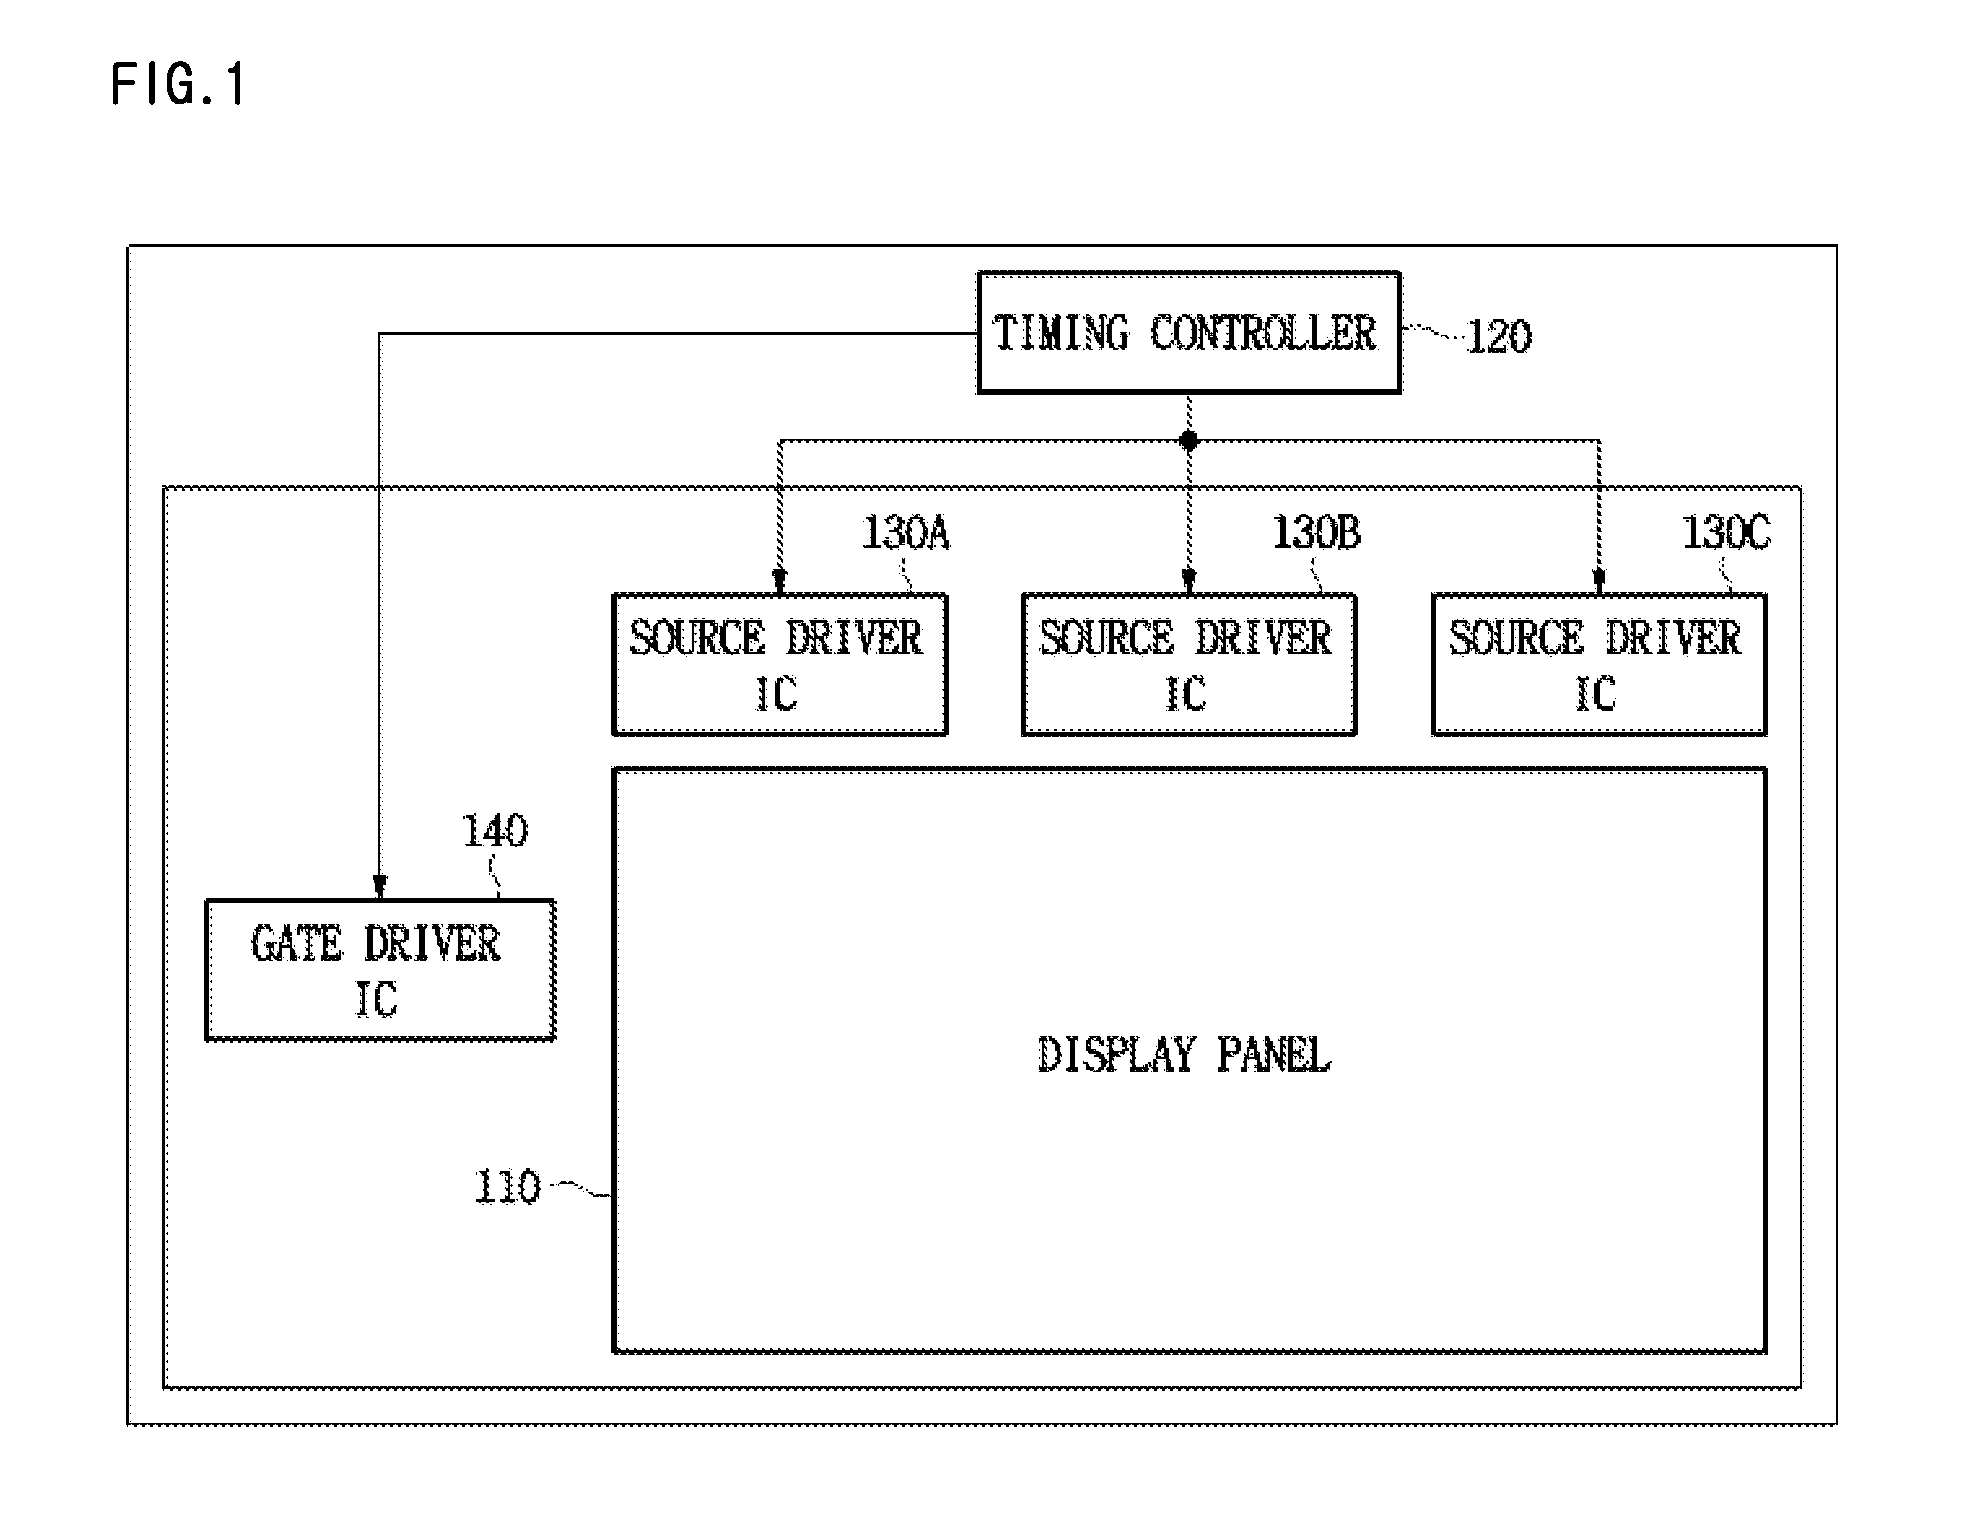 Display device having a merge source driver and a timing controller